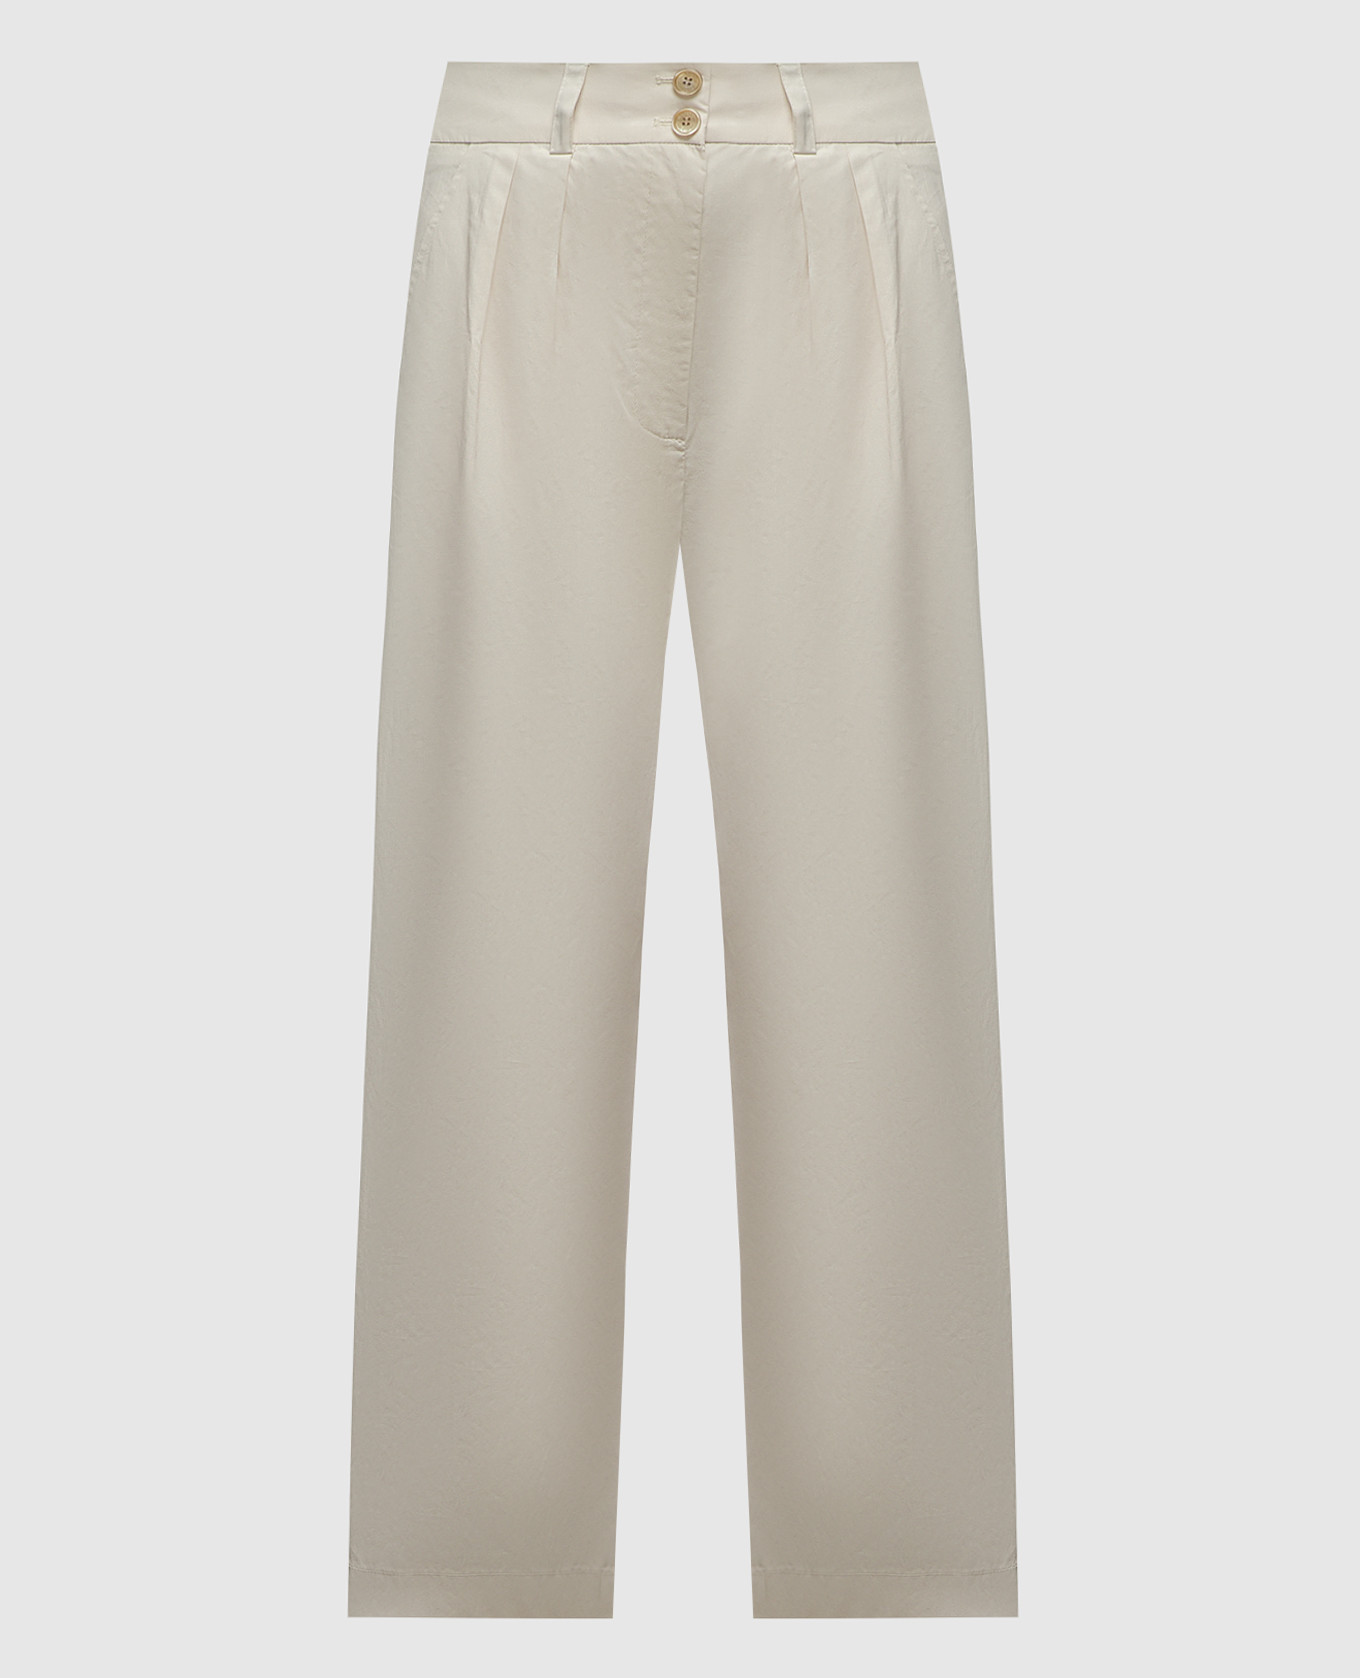 Beige pants with a logo